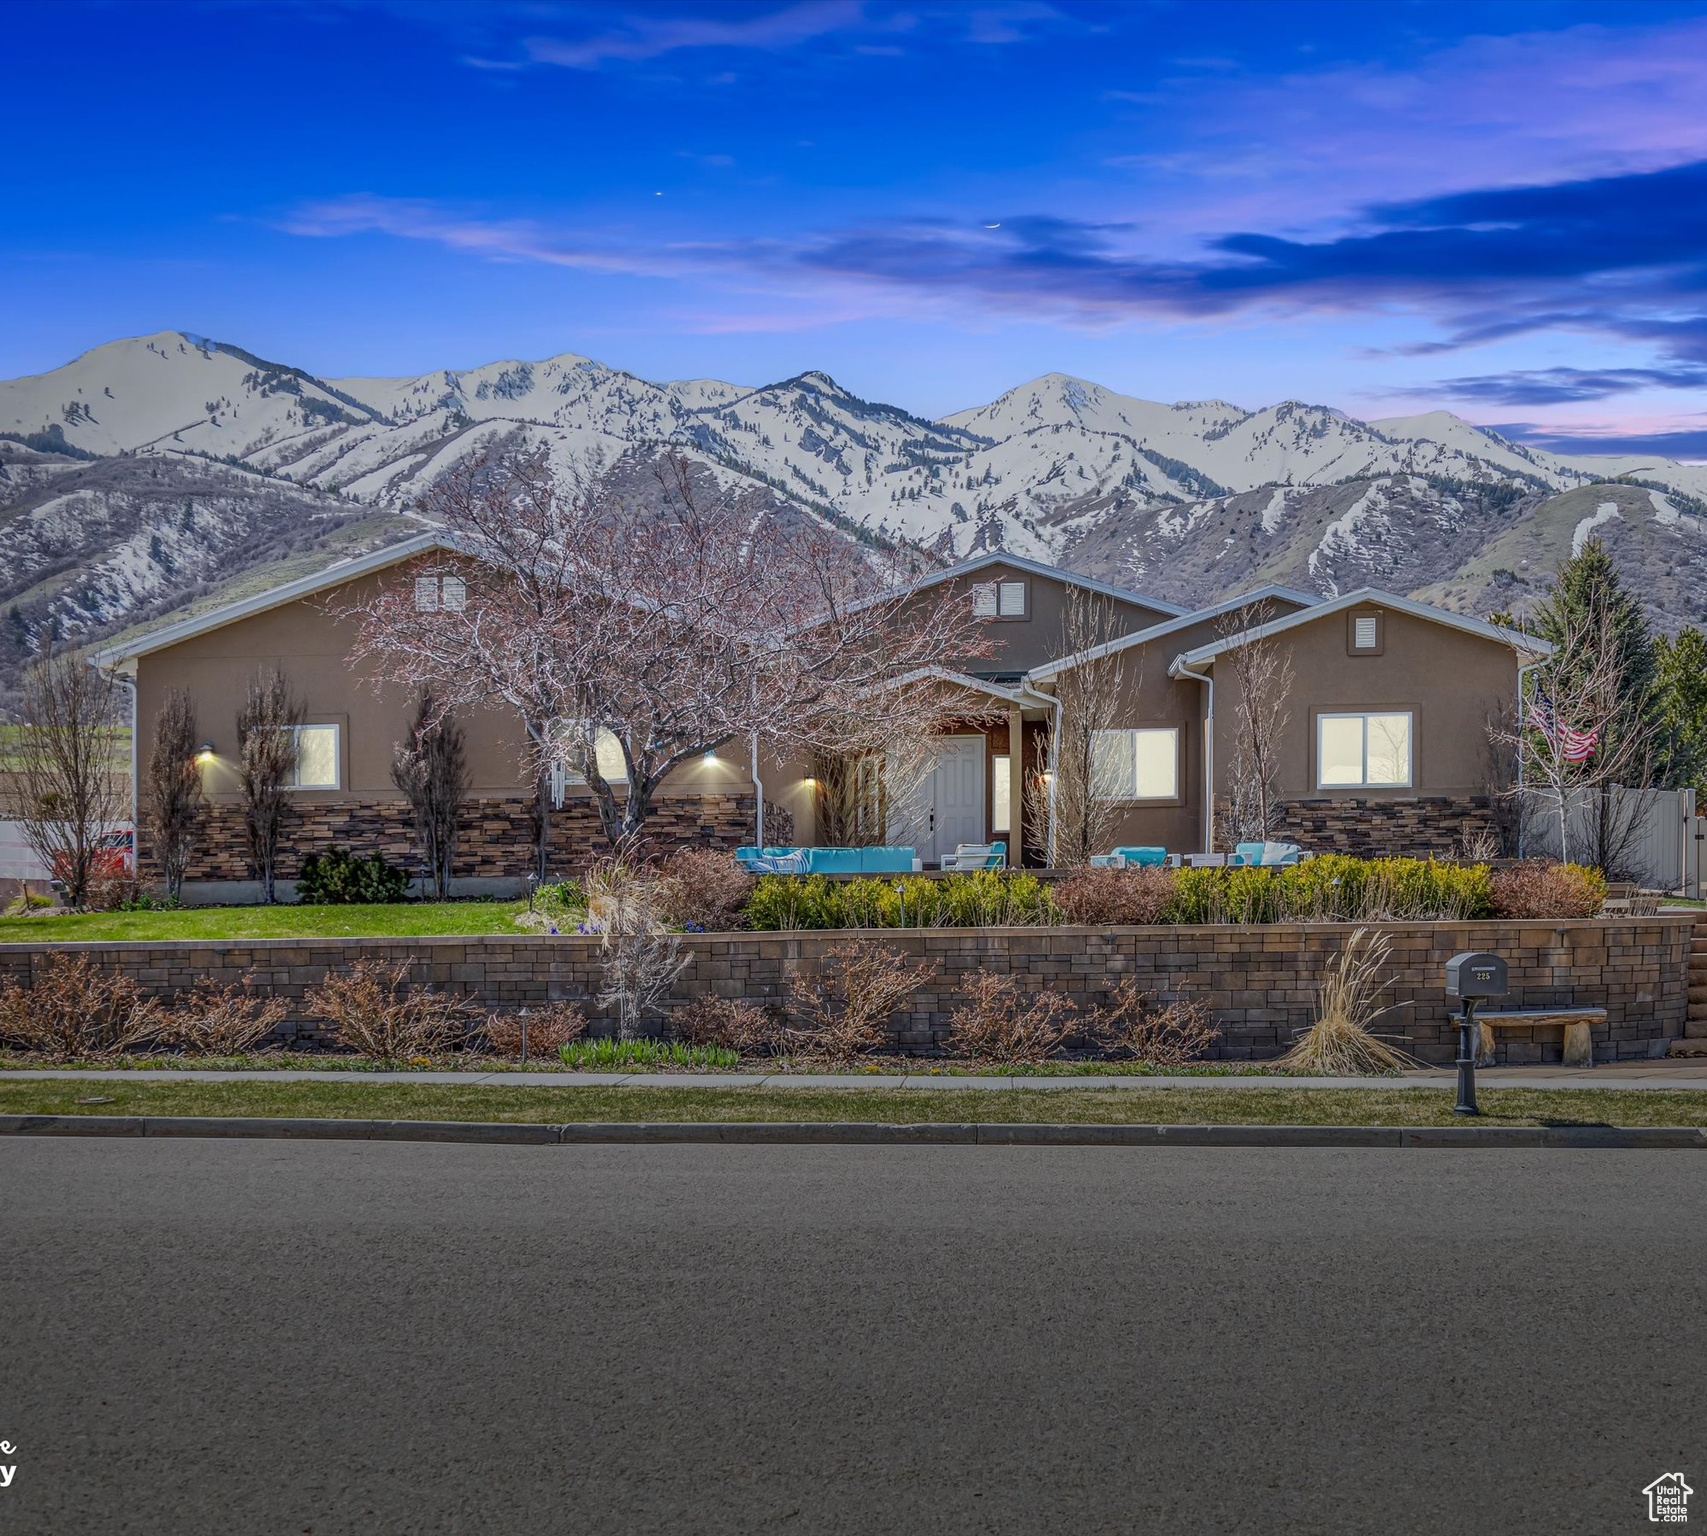 Ranch-style home with a mountain view